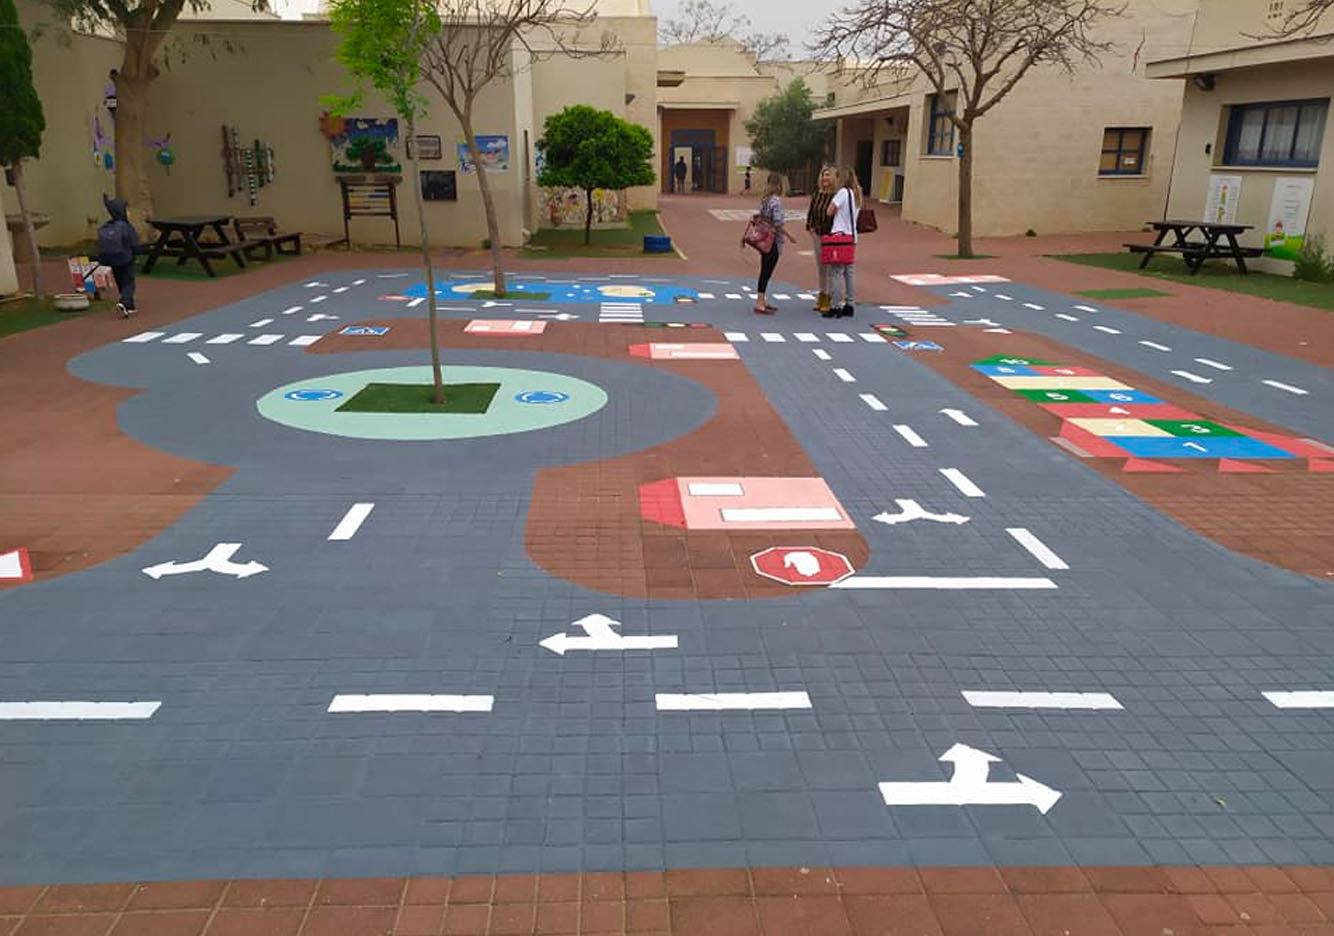 Tambour paint helps schoolkids learn about road safety